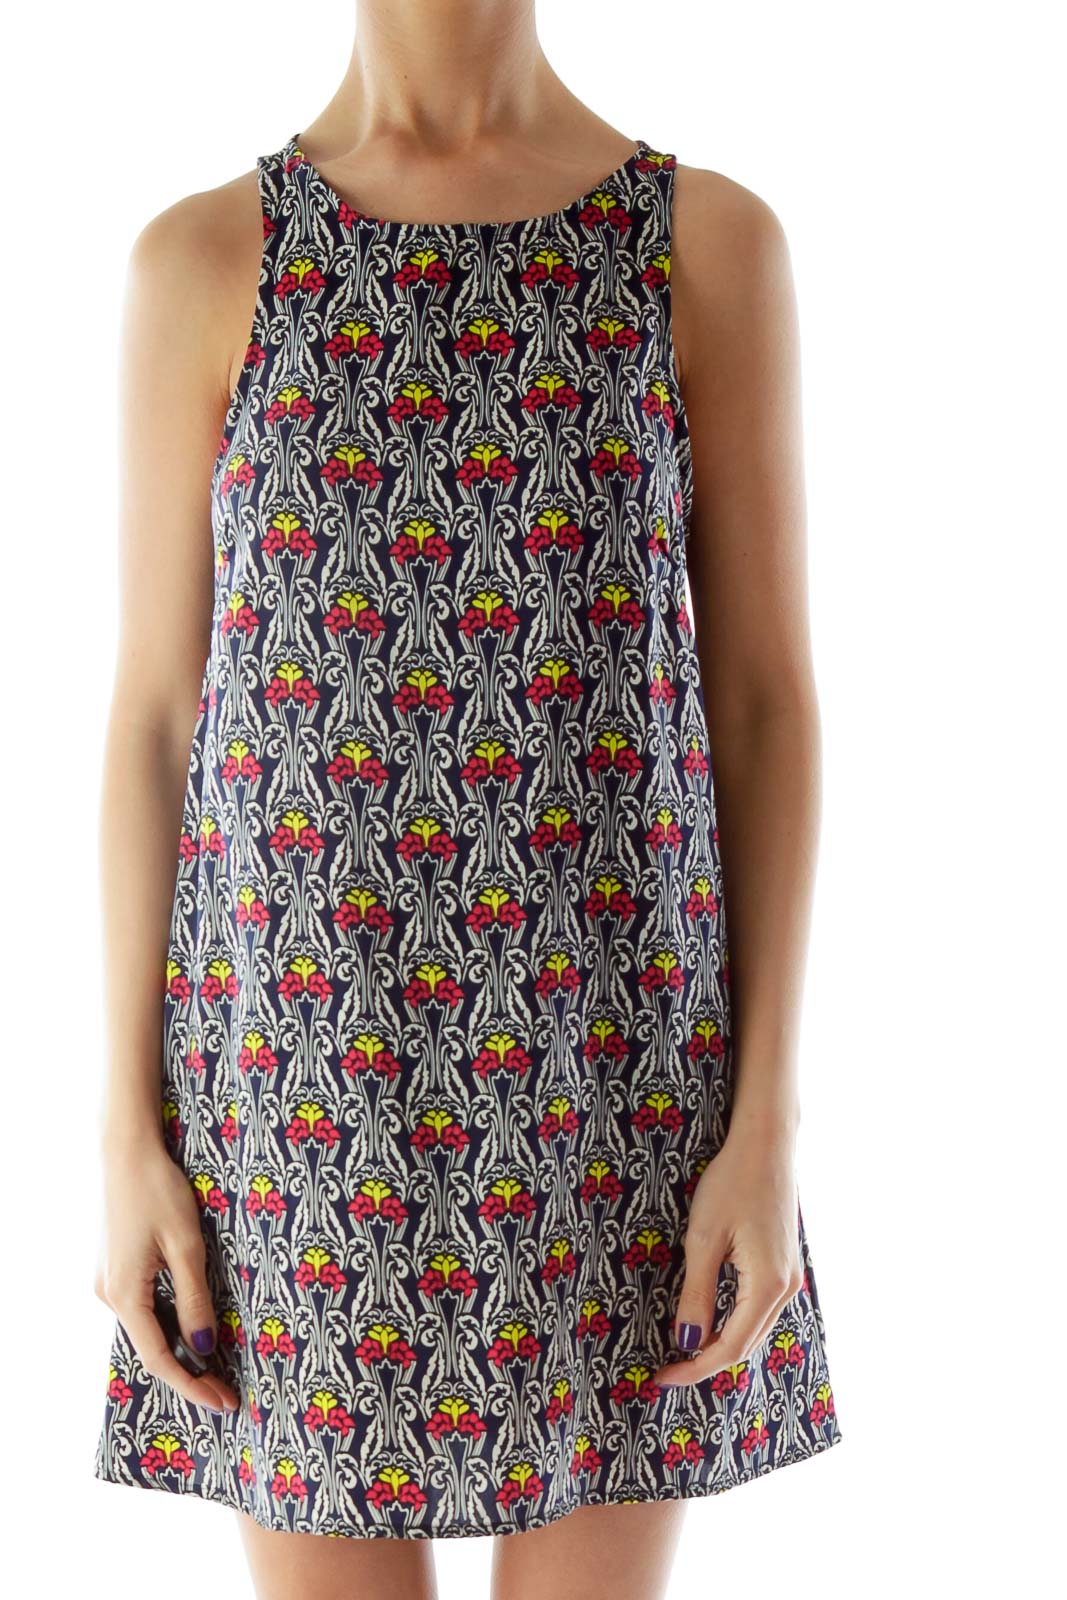 Navy Multicolored Print Tank Top Front